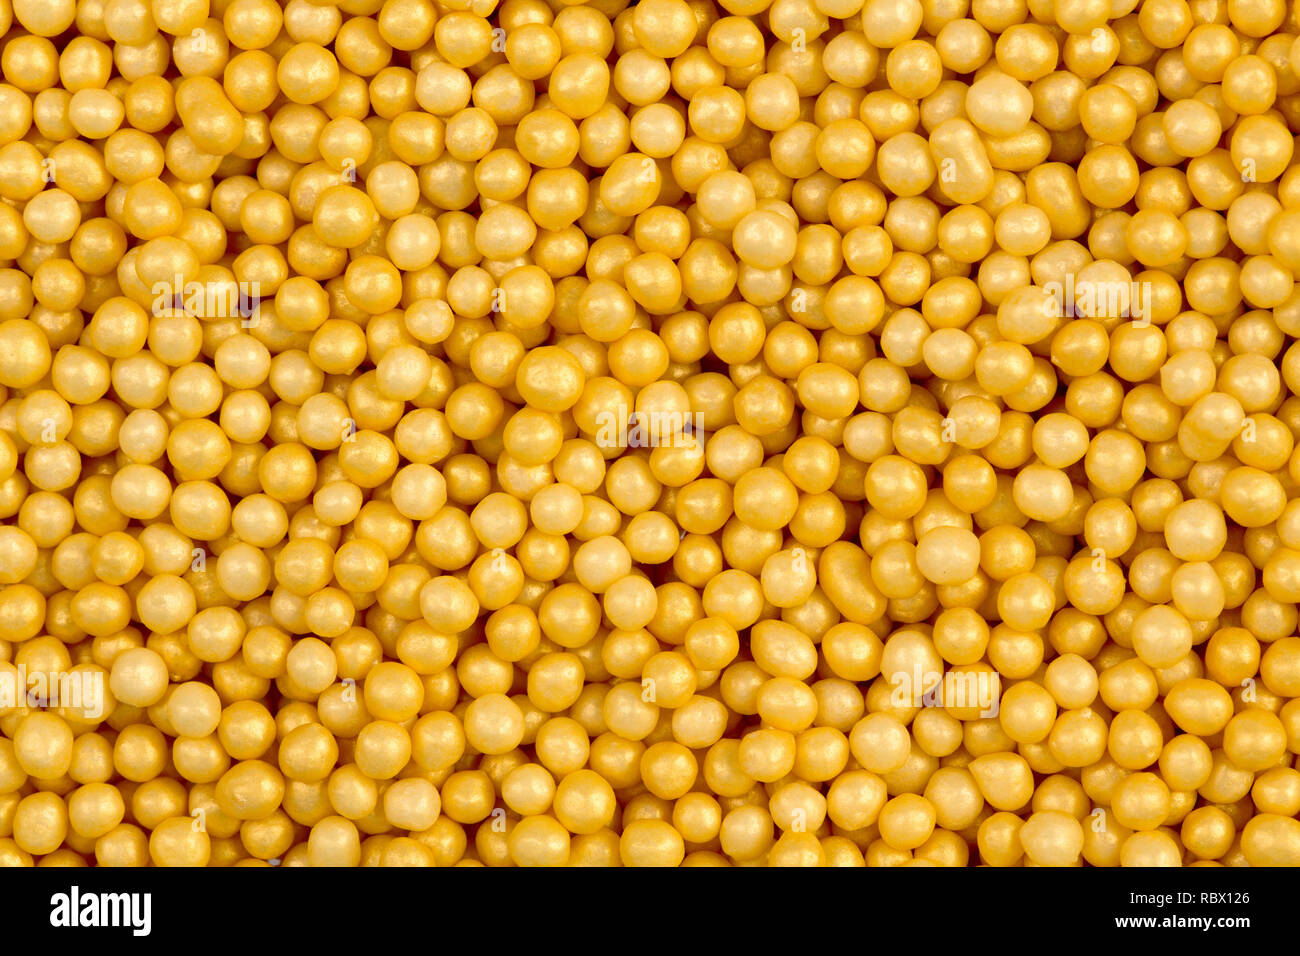 Orange gum ball background. Abstract food texture. Stock Photo